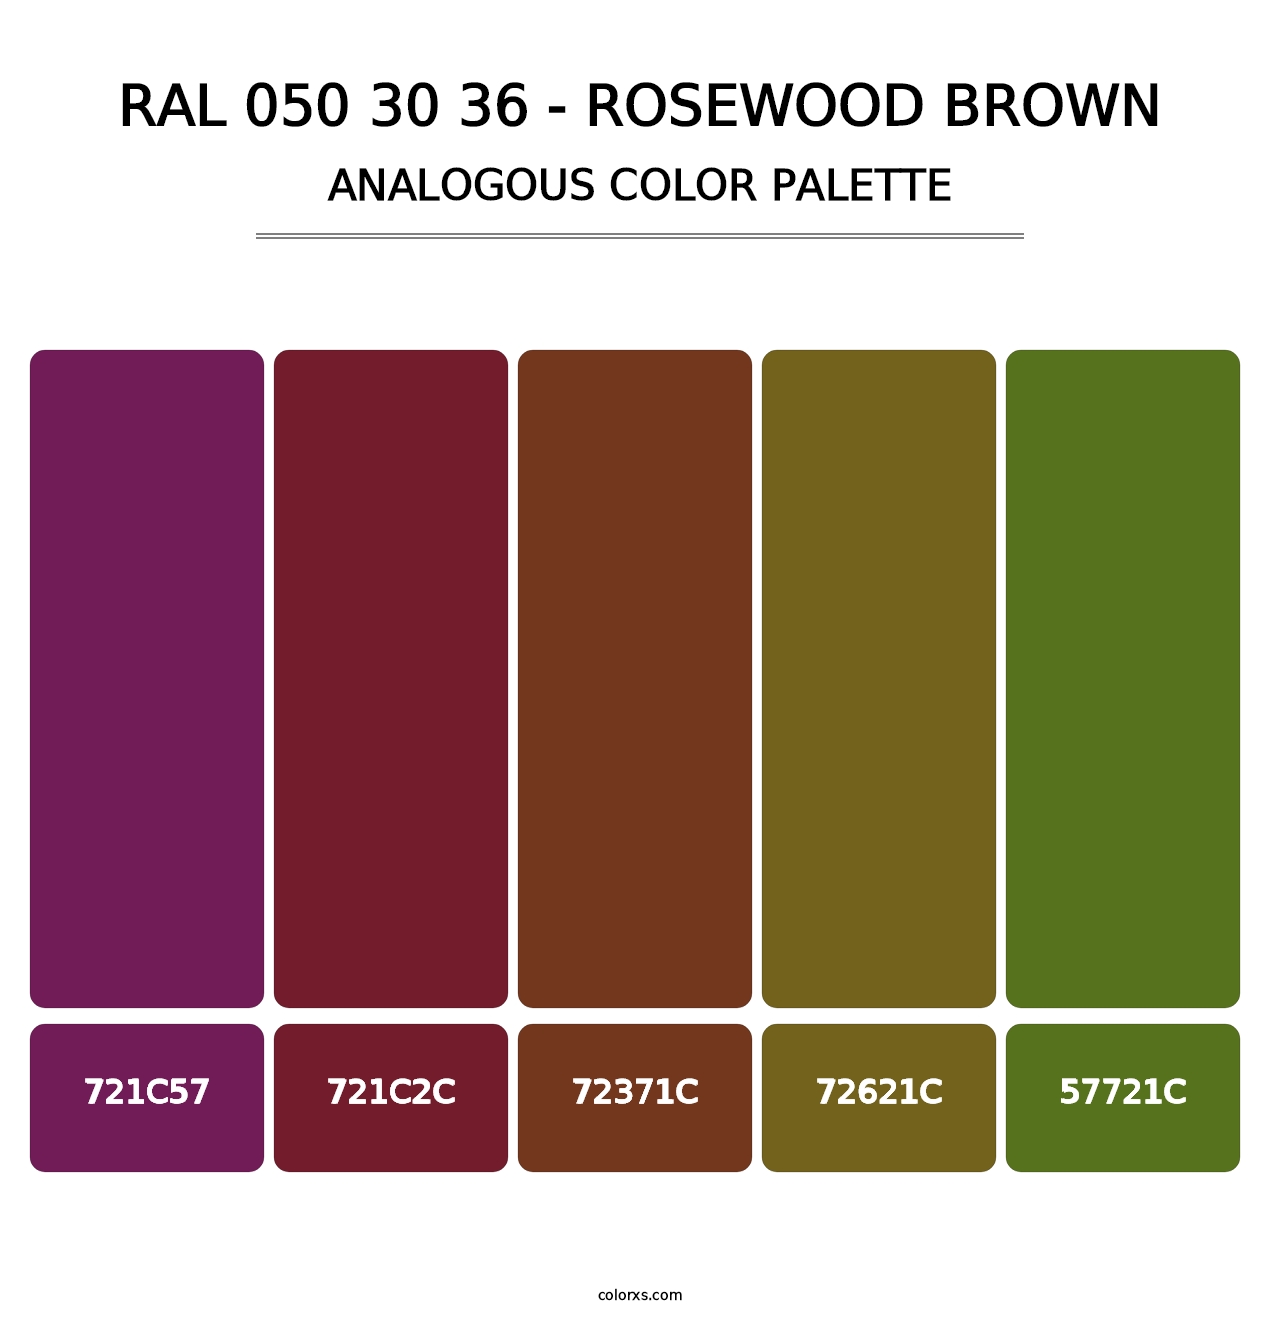 RAL 050 30 36 - Rosewood Brown - Analogous Color Palette